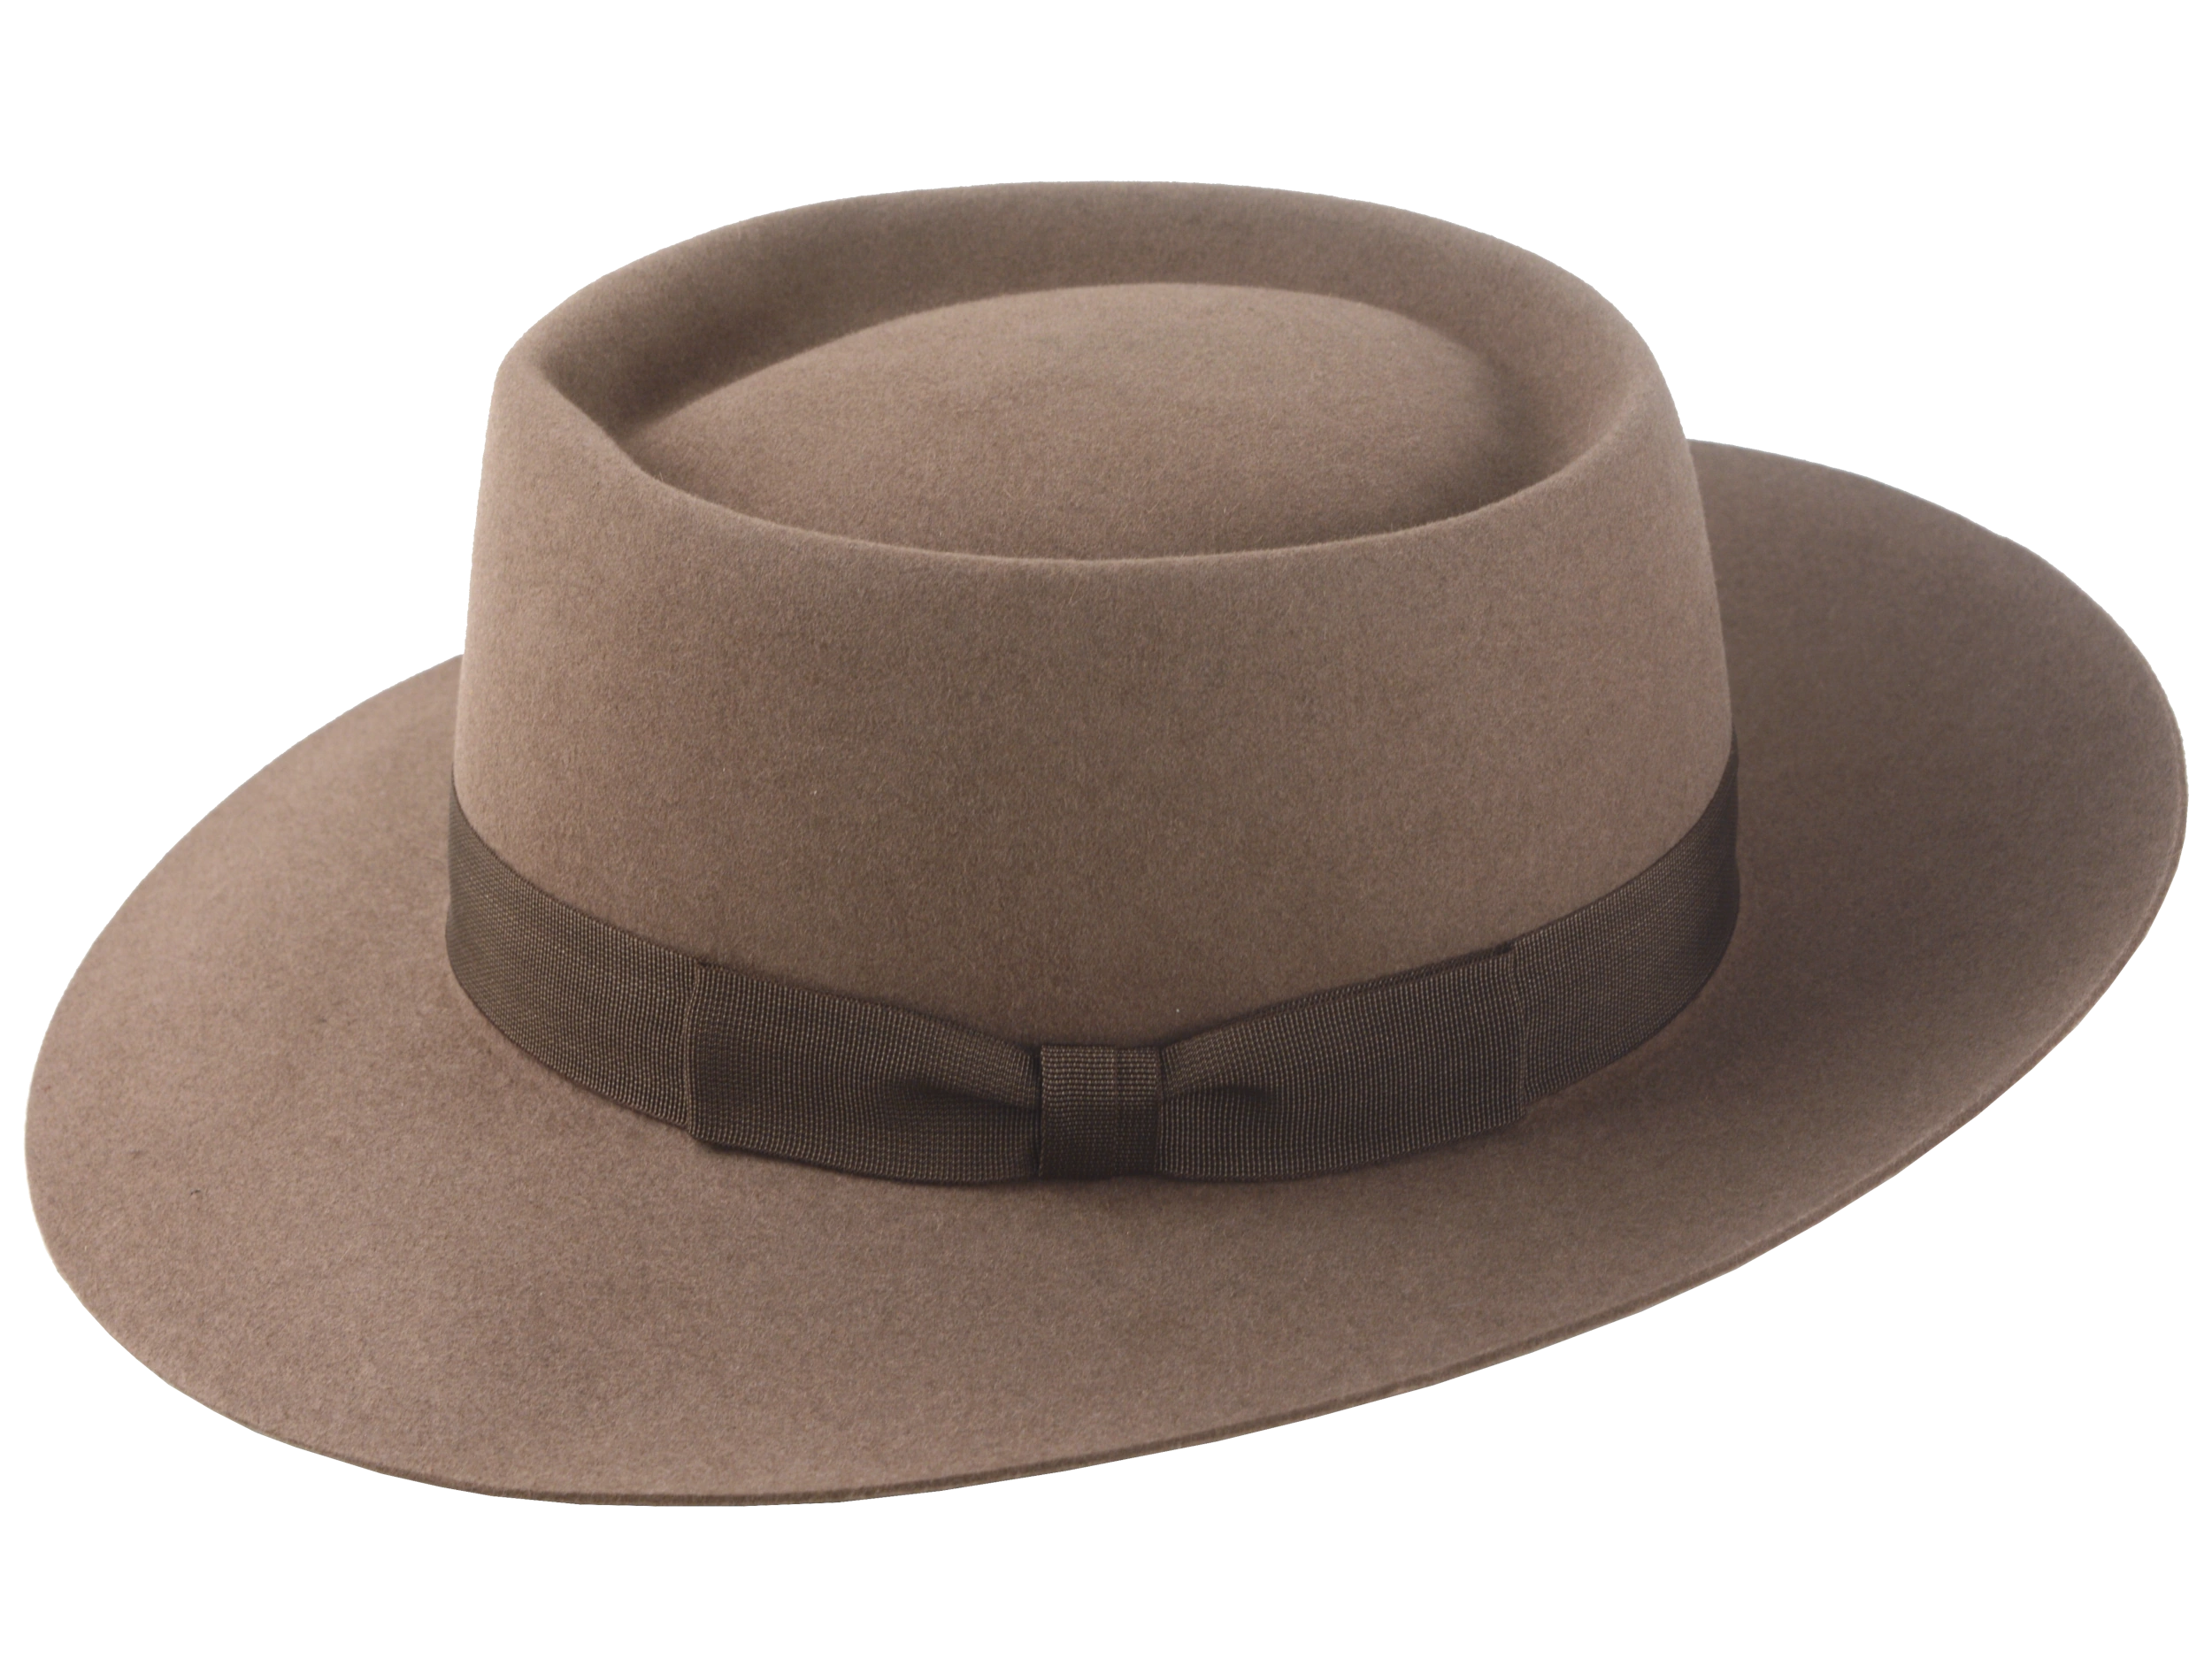 Artisanal wide-brim porkpie hat, named Oppenheimer, in premium beaver felt showcasing the raw edge brim and adorned with a vintage quality ribbon in pecan color against the coffee-hued backdrop of the hat body 2